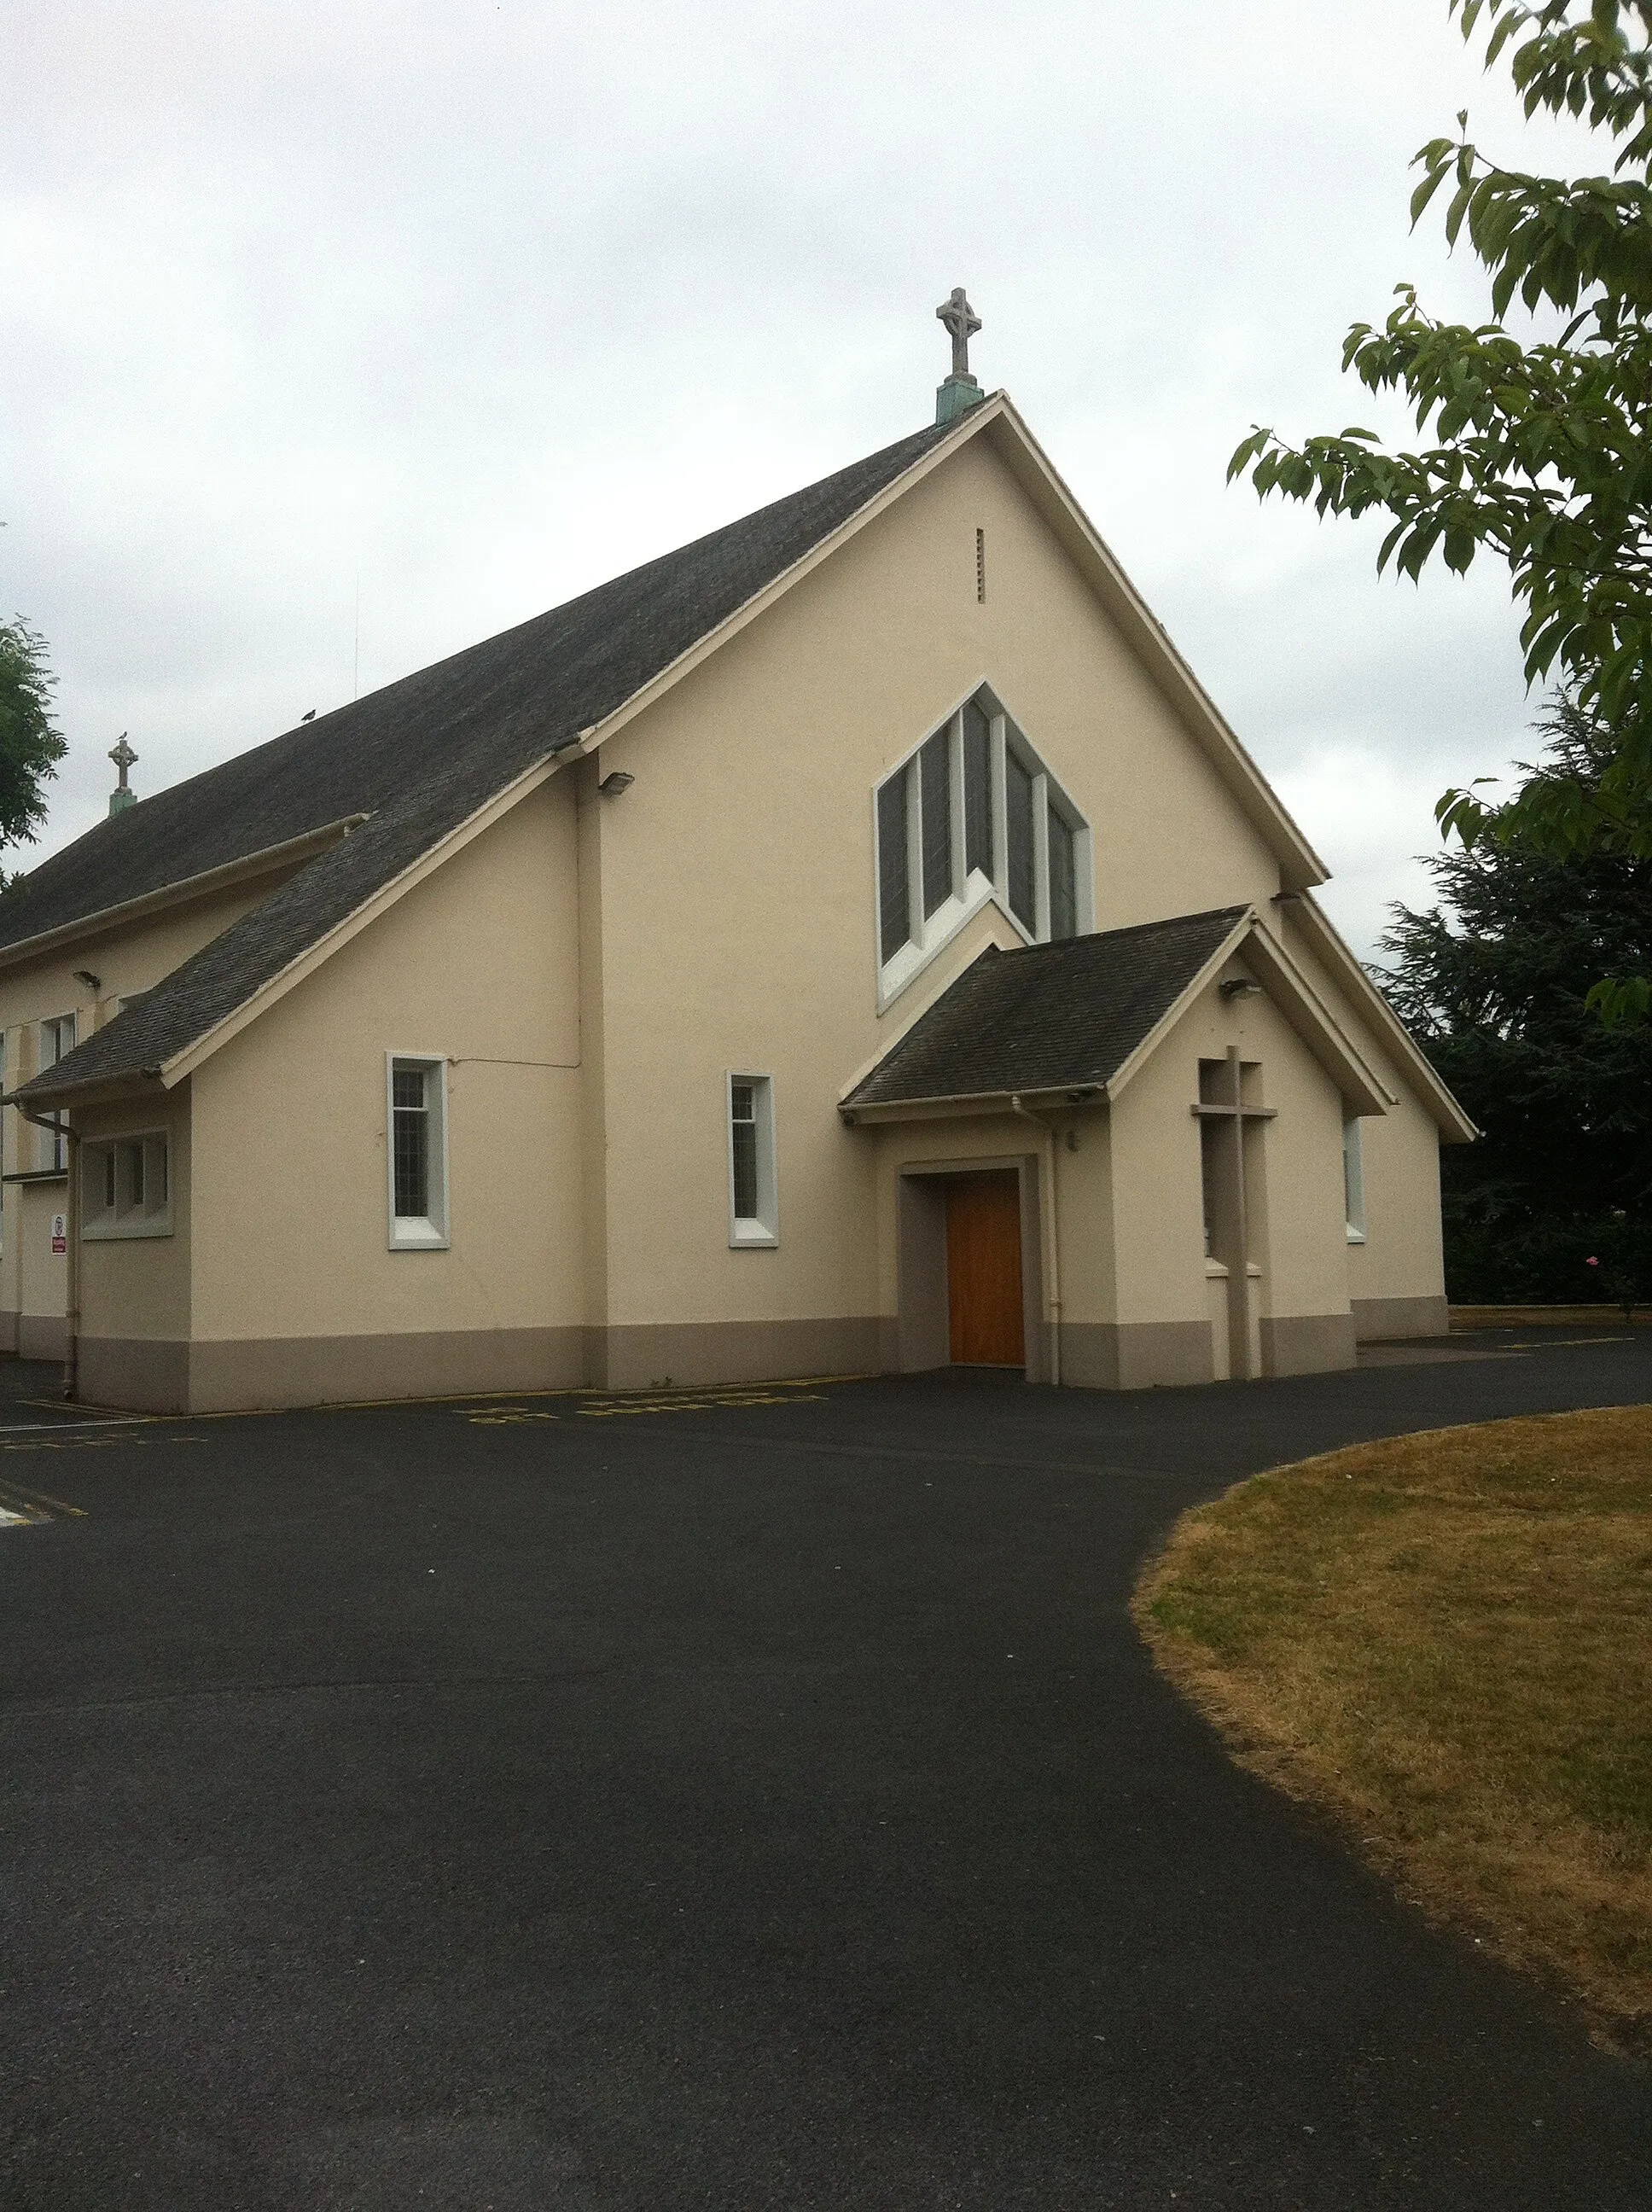 Photo showing: This is a photograph of the church in Palmerstown, Co. Dublin